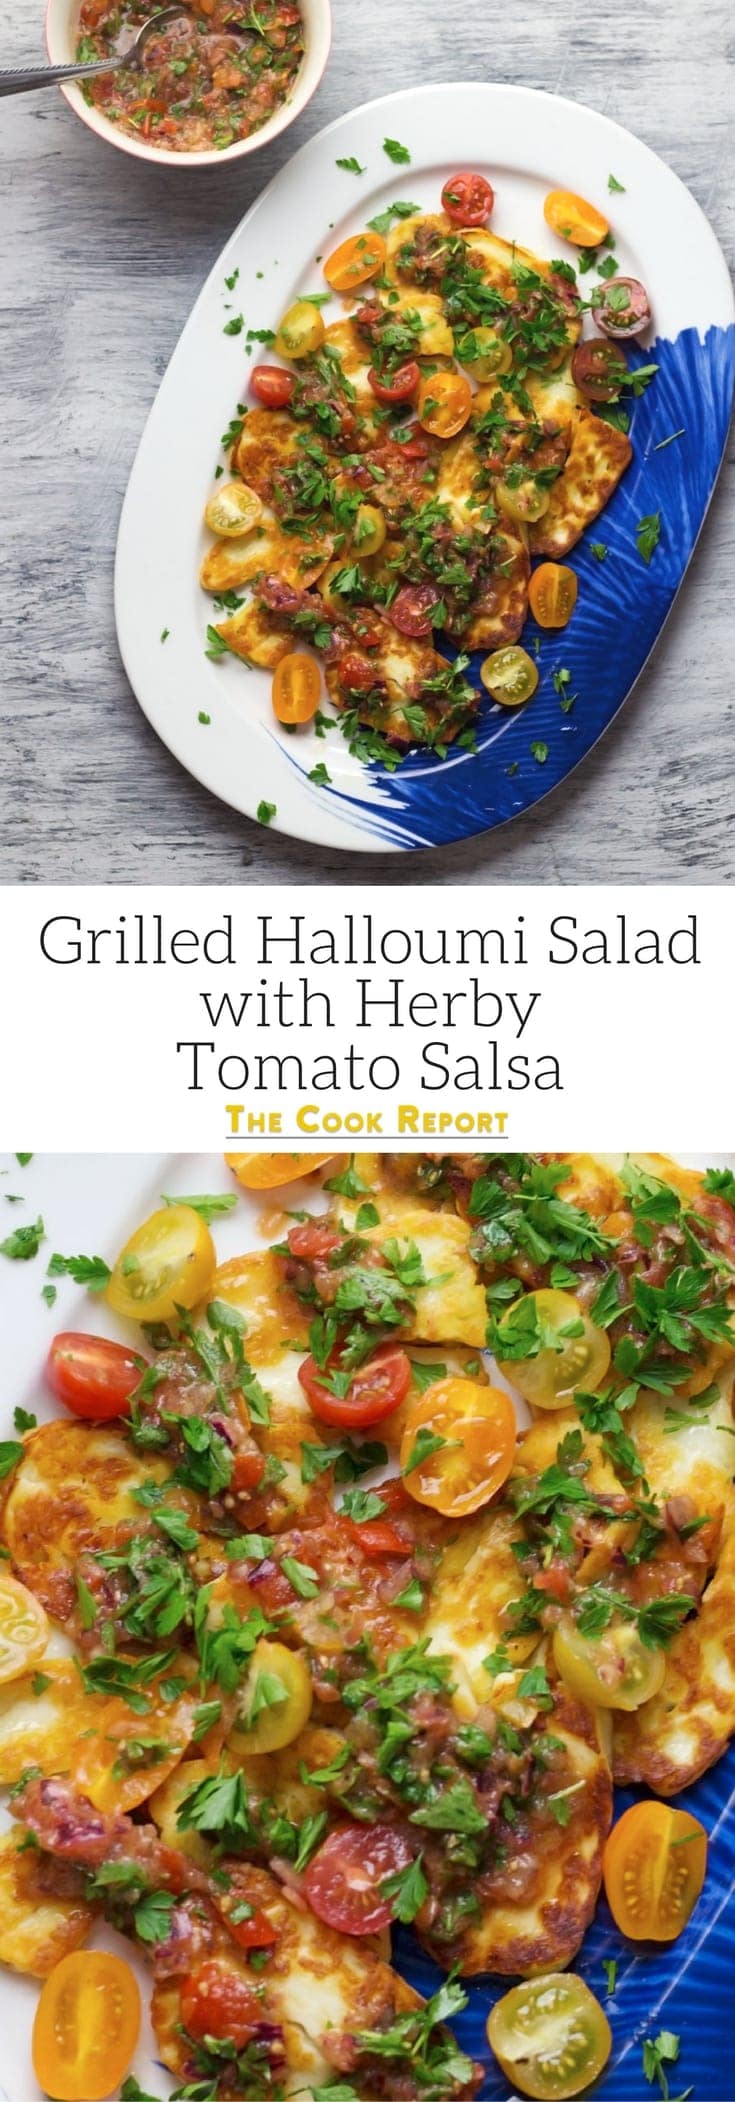 This grilled halloumi salad is topped with a beautiful herby tomato salsa. It's so easy to make and is the ultimate summer meal!